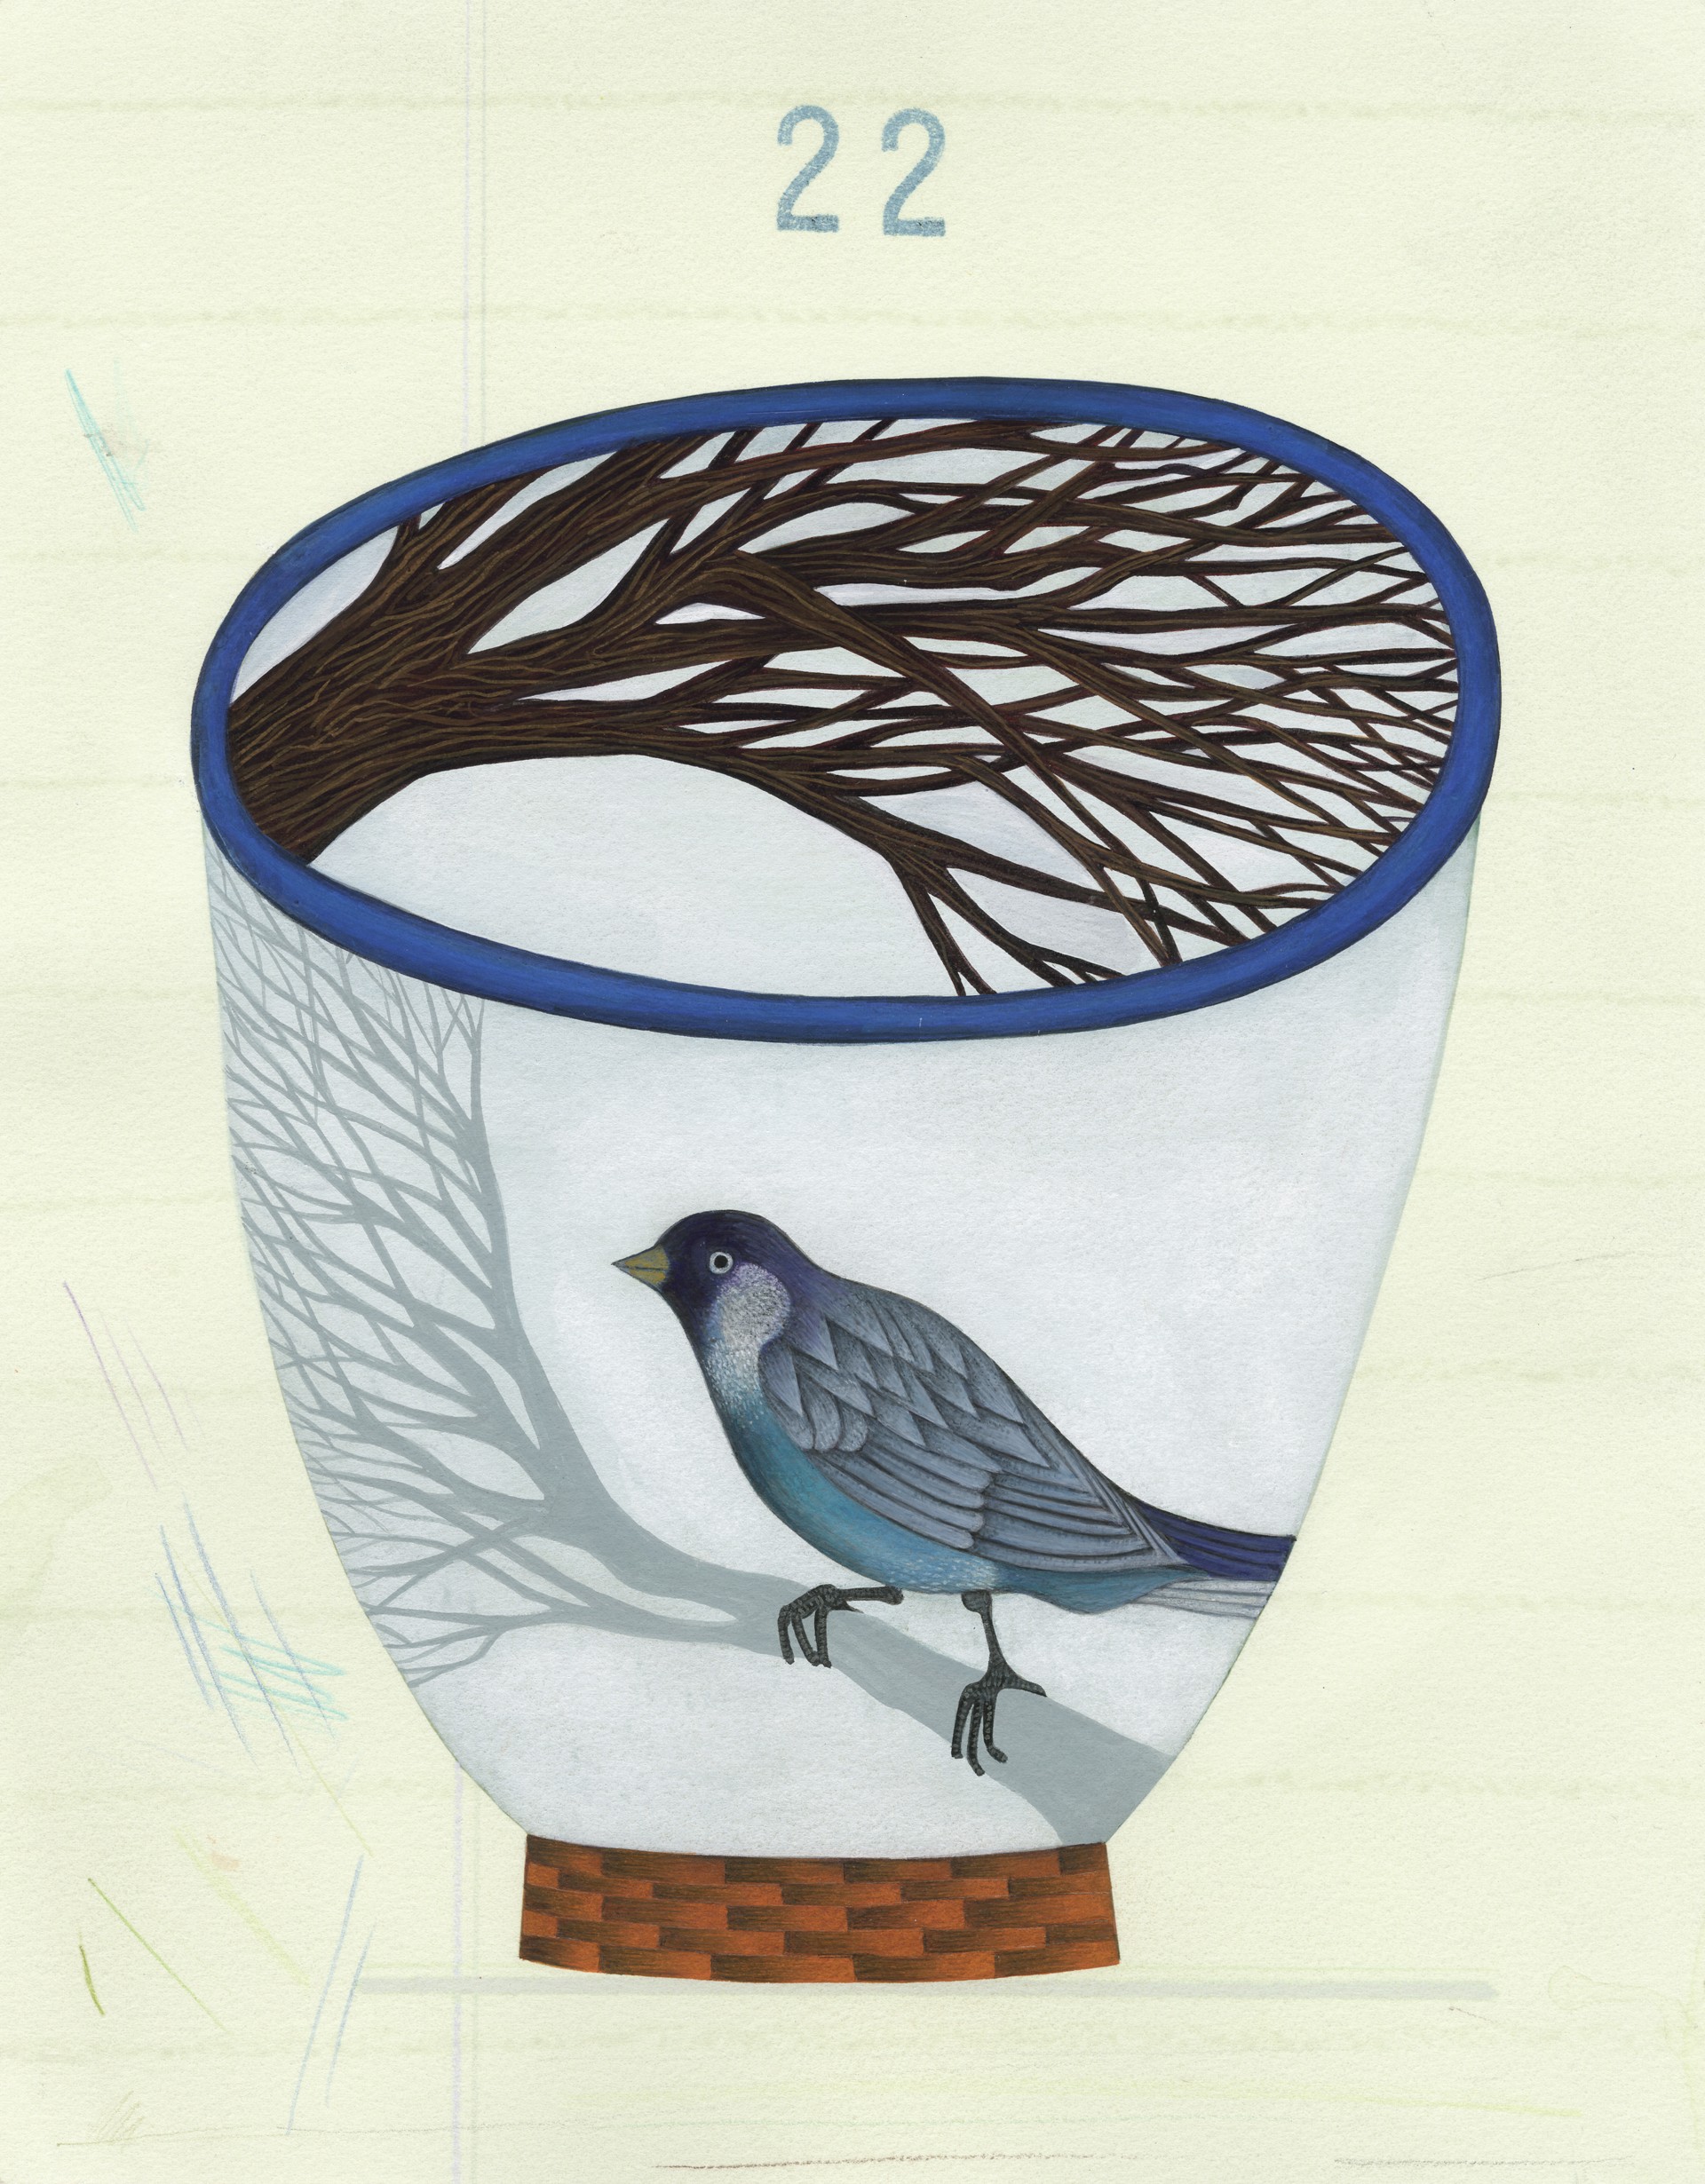 Cup No. 22 by Anne Smith